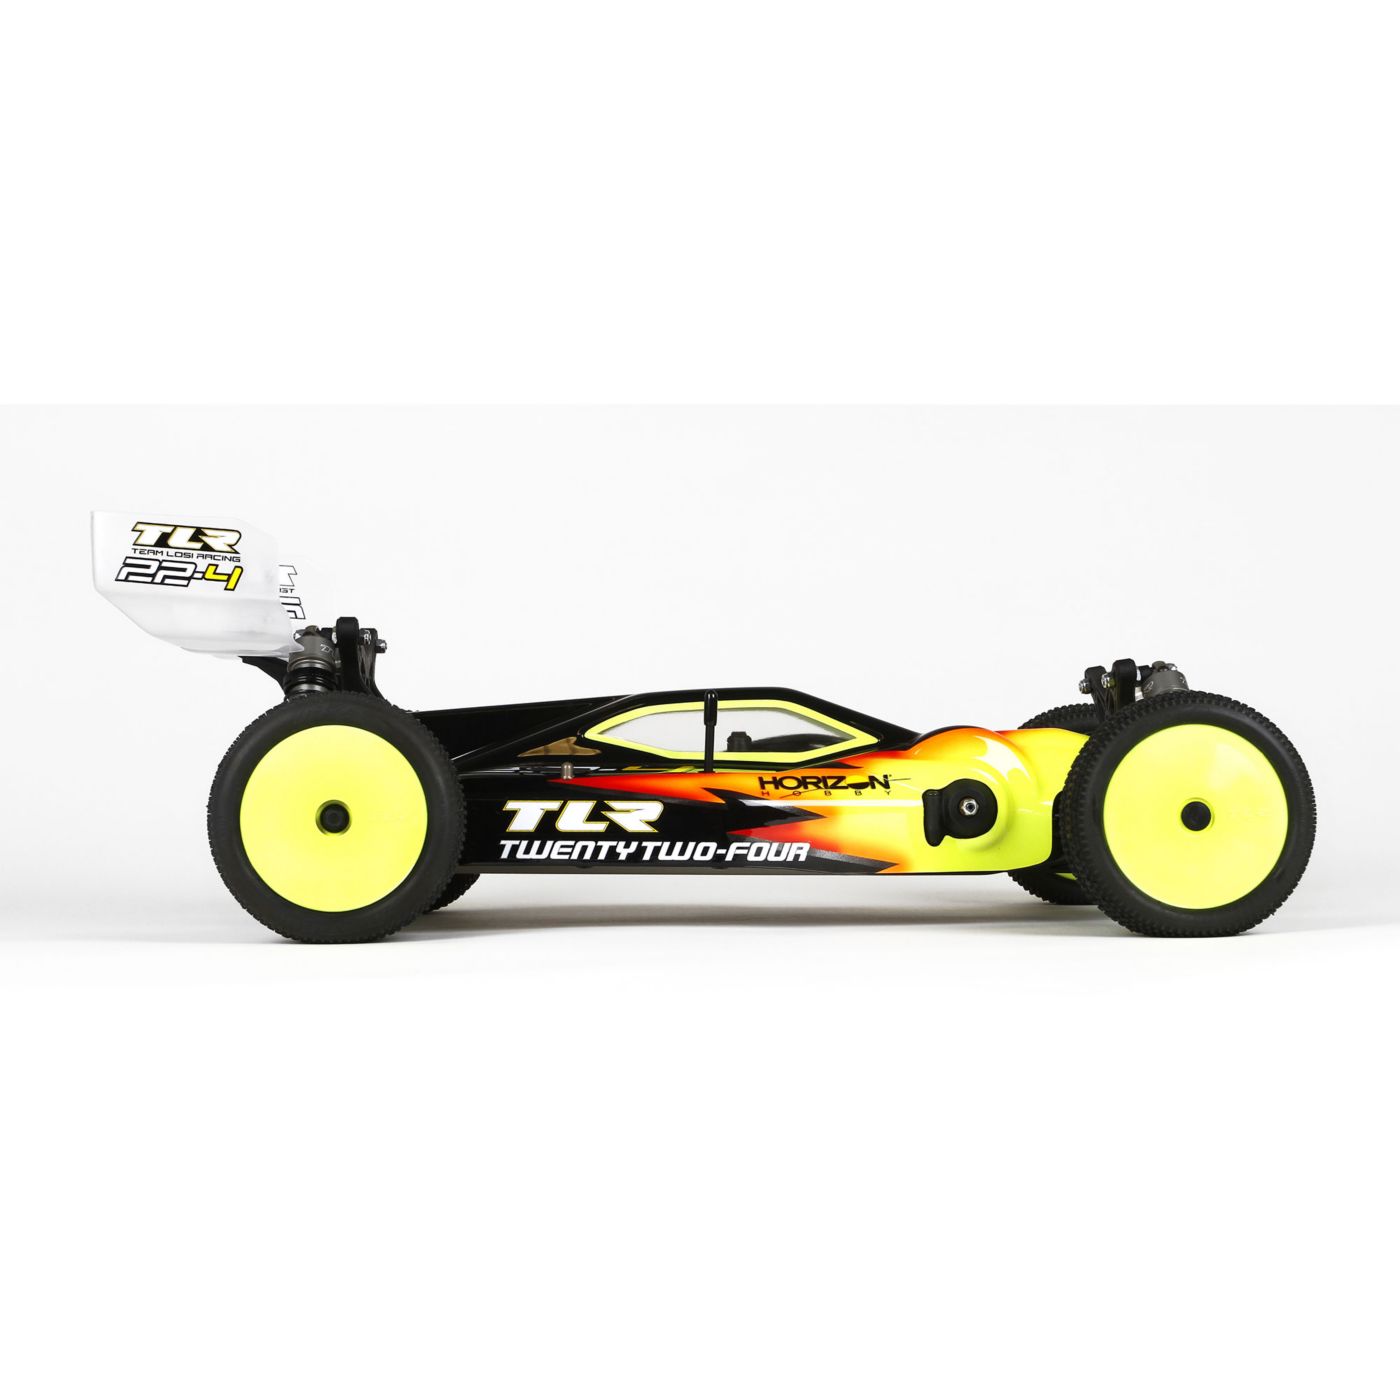 [News]Le Losi Twenty Two-Four, 1/10 4wd  TLR03005_a2?$pdpLand$